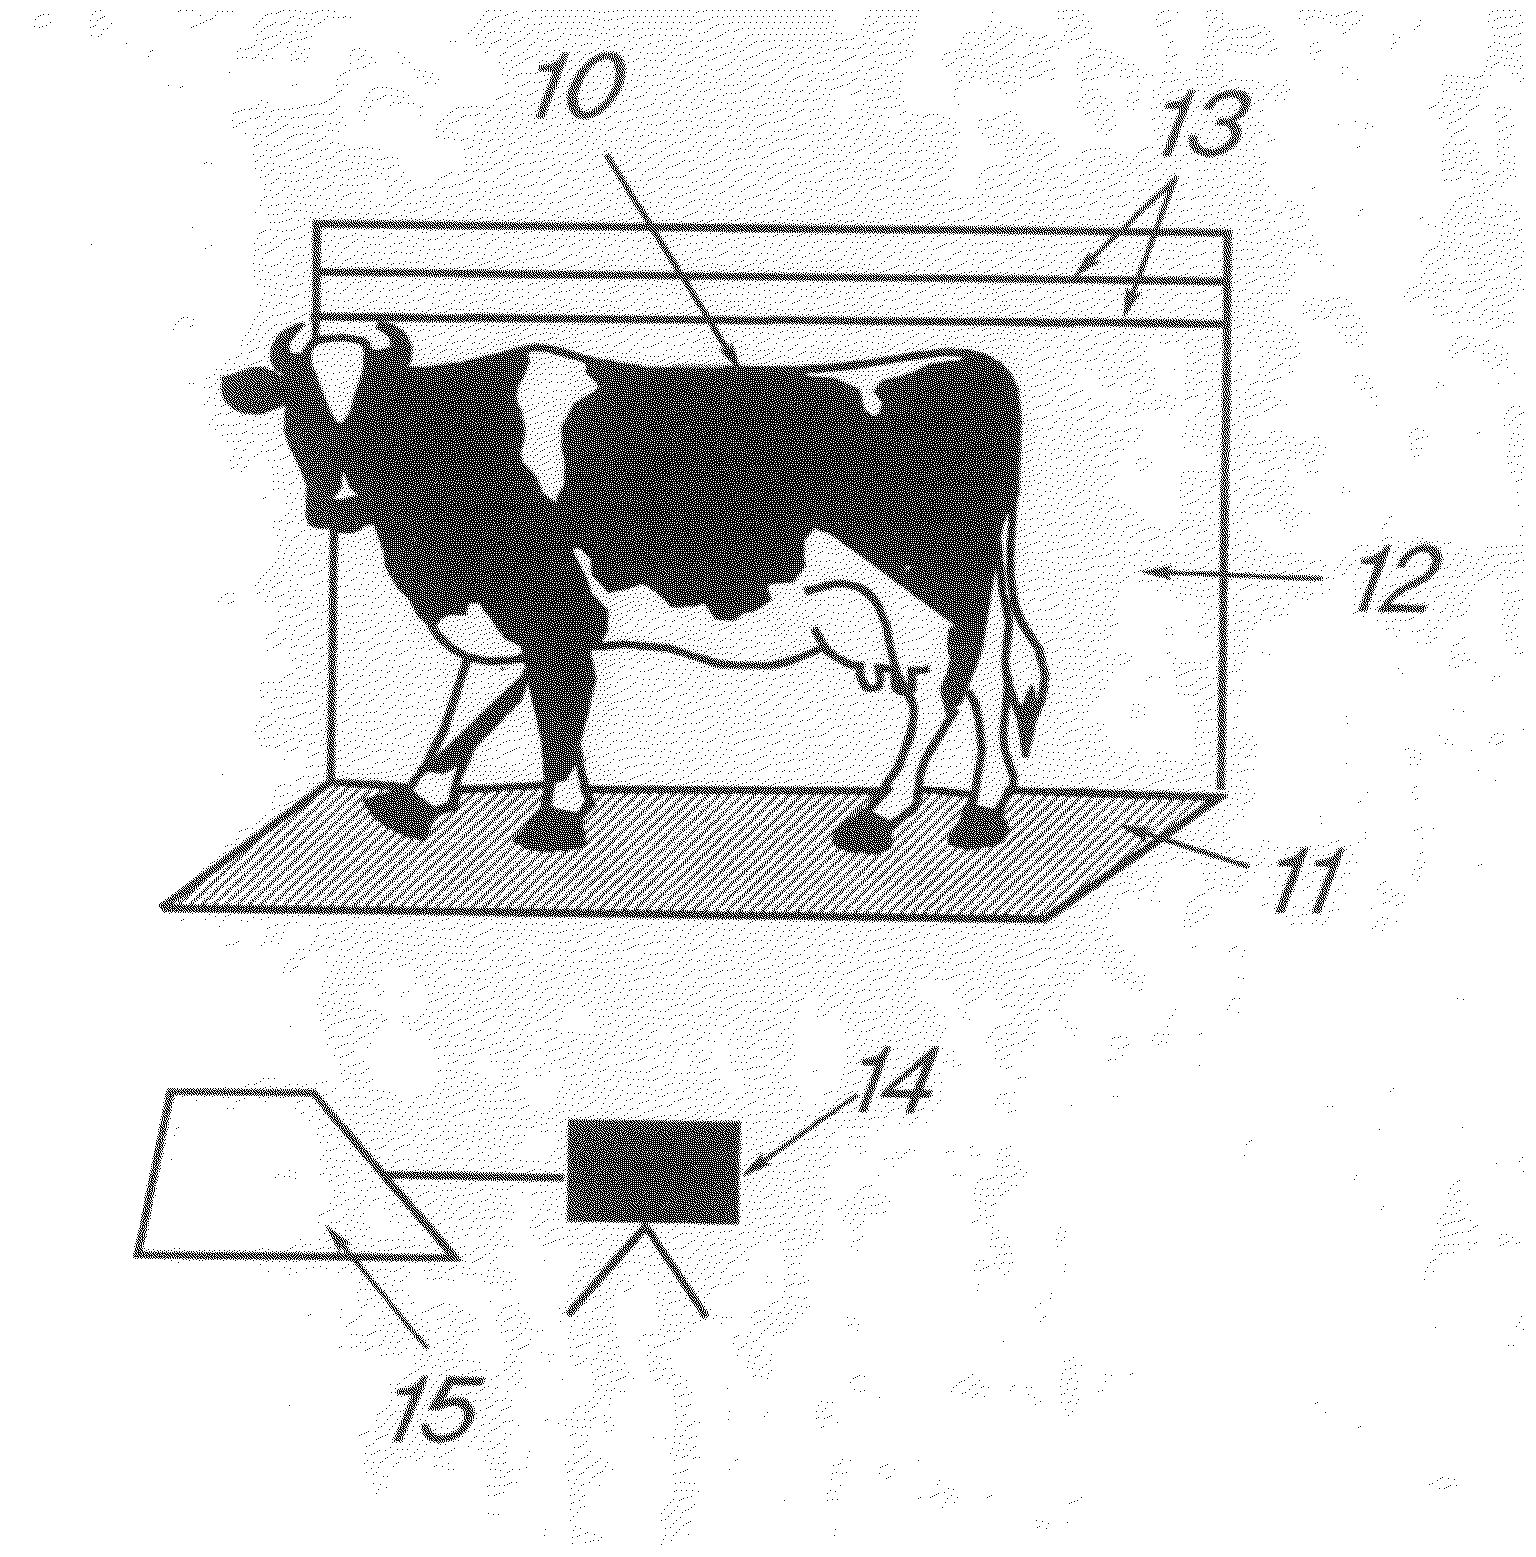 Method and a System for Measuring an Animal's Height